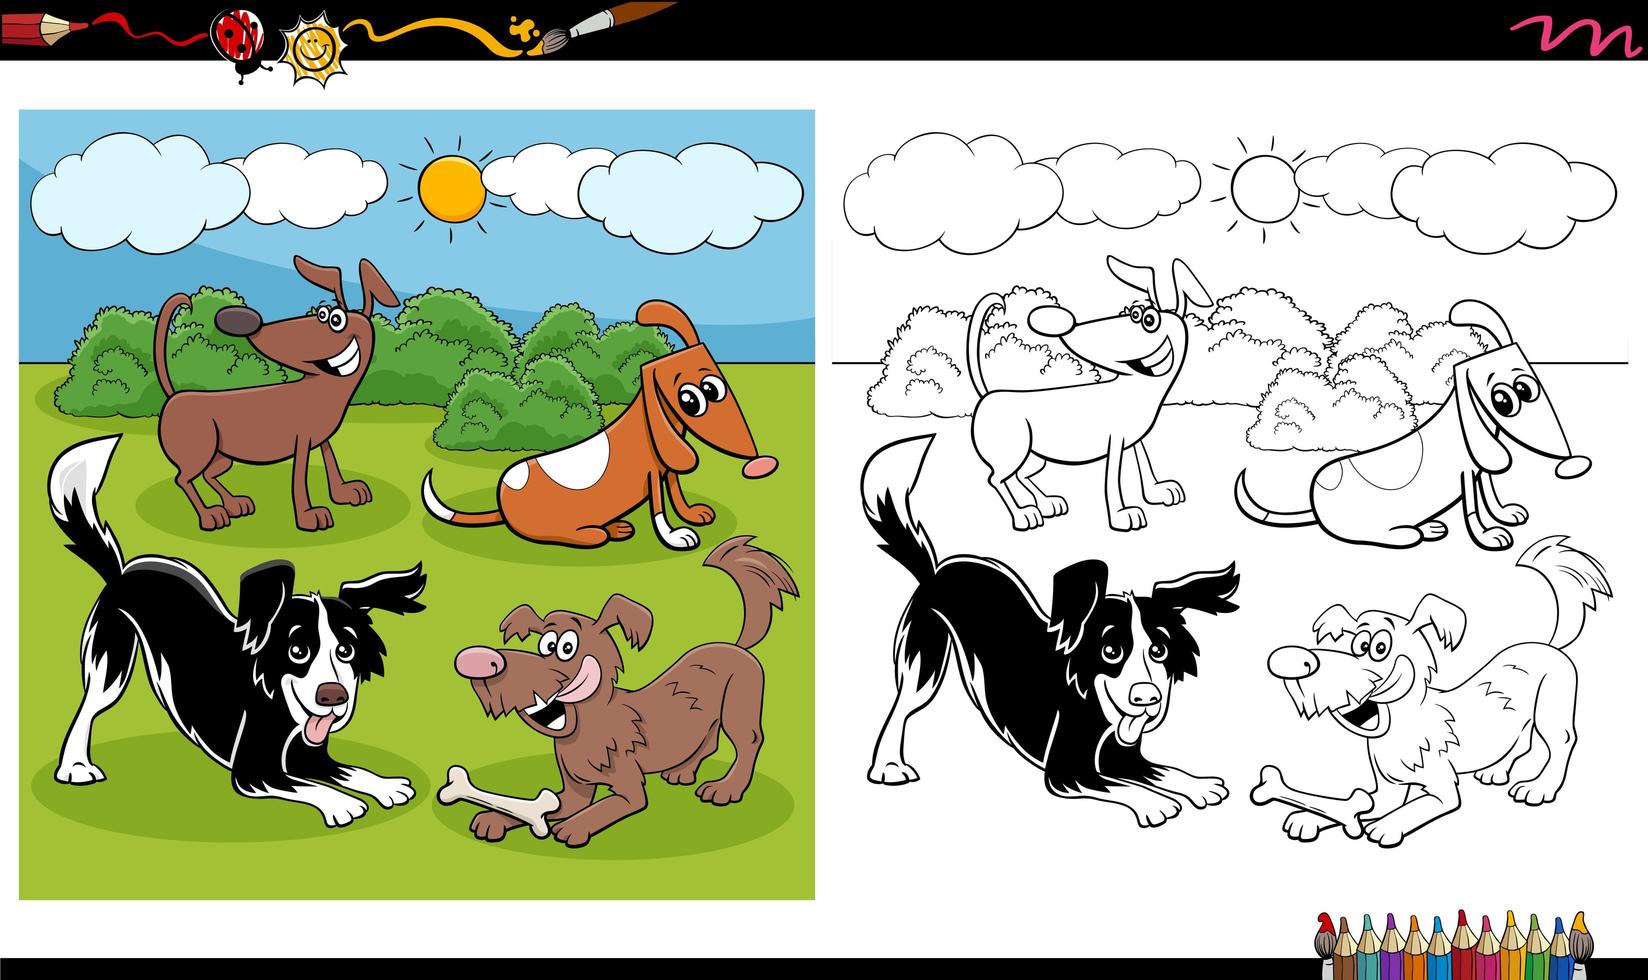 Cartoon dogs and puppies group coloring book page vector